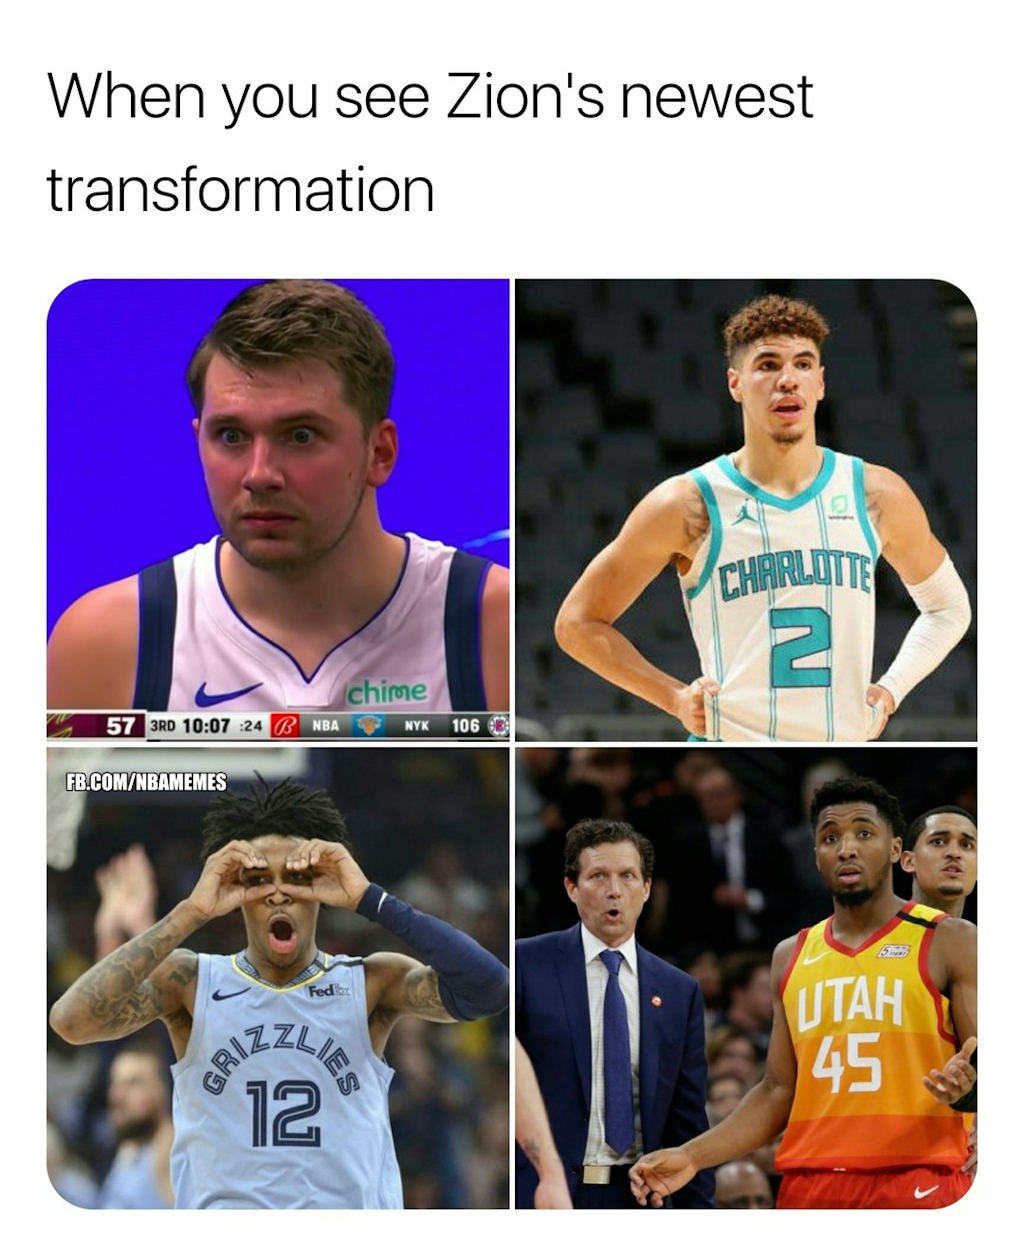 [BREAKING] Zion Williamson's shocking transformation spells disaster for the Pelicans

#tranformation #neworleans #pelicans #nba